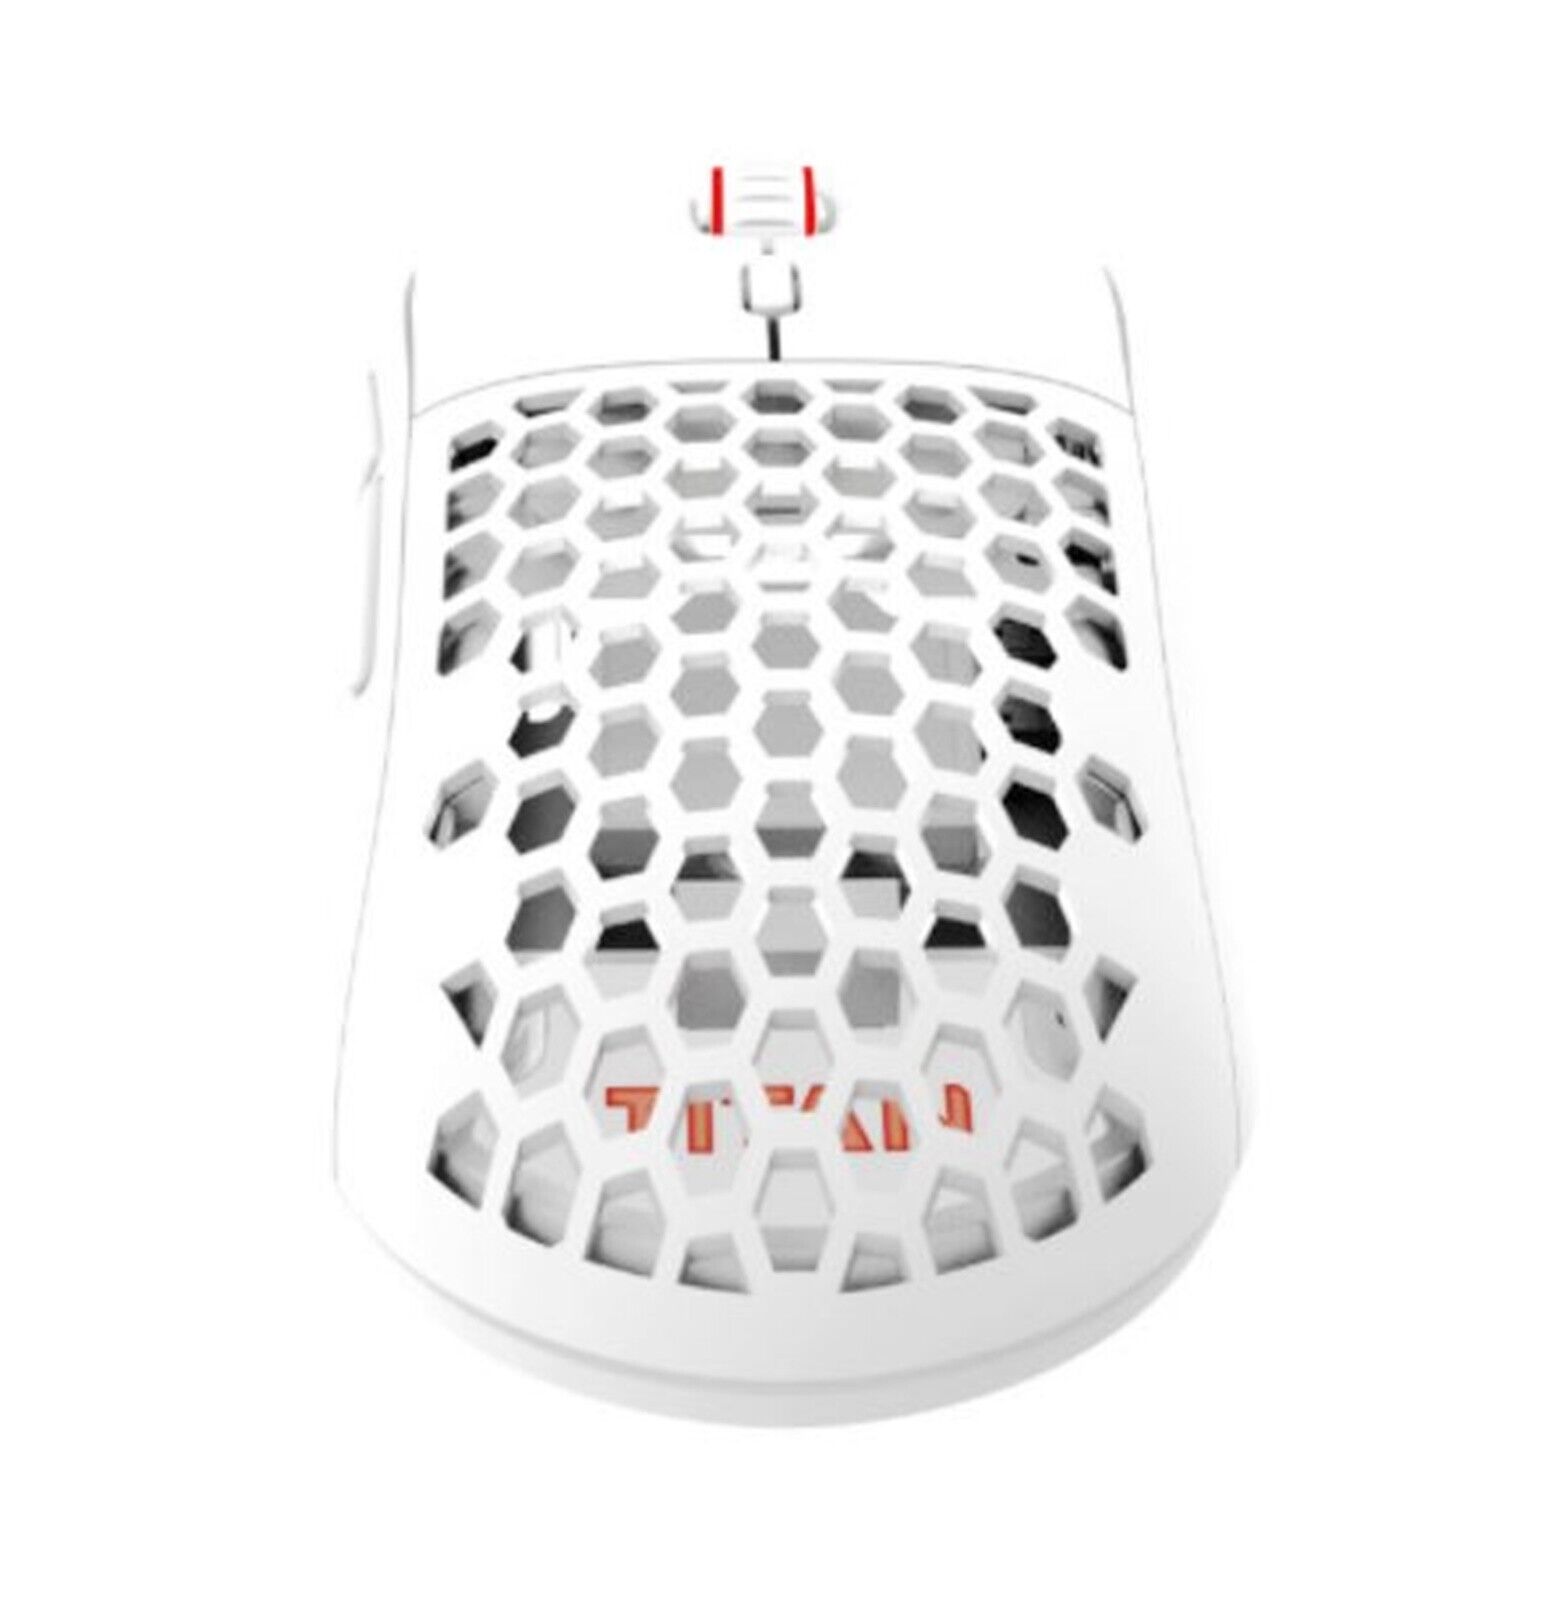 Xenics Titan GX AIR Wireless Professional Gaming Mouse 19000DPI PAW3370 - White Gemaakt in Japan Gemaakt in Japan